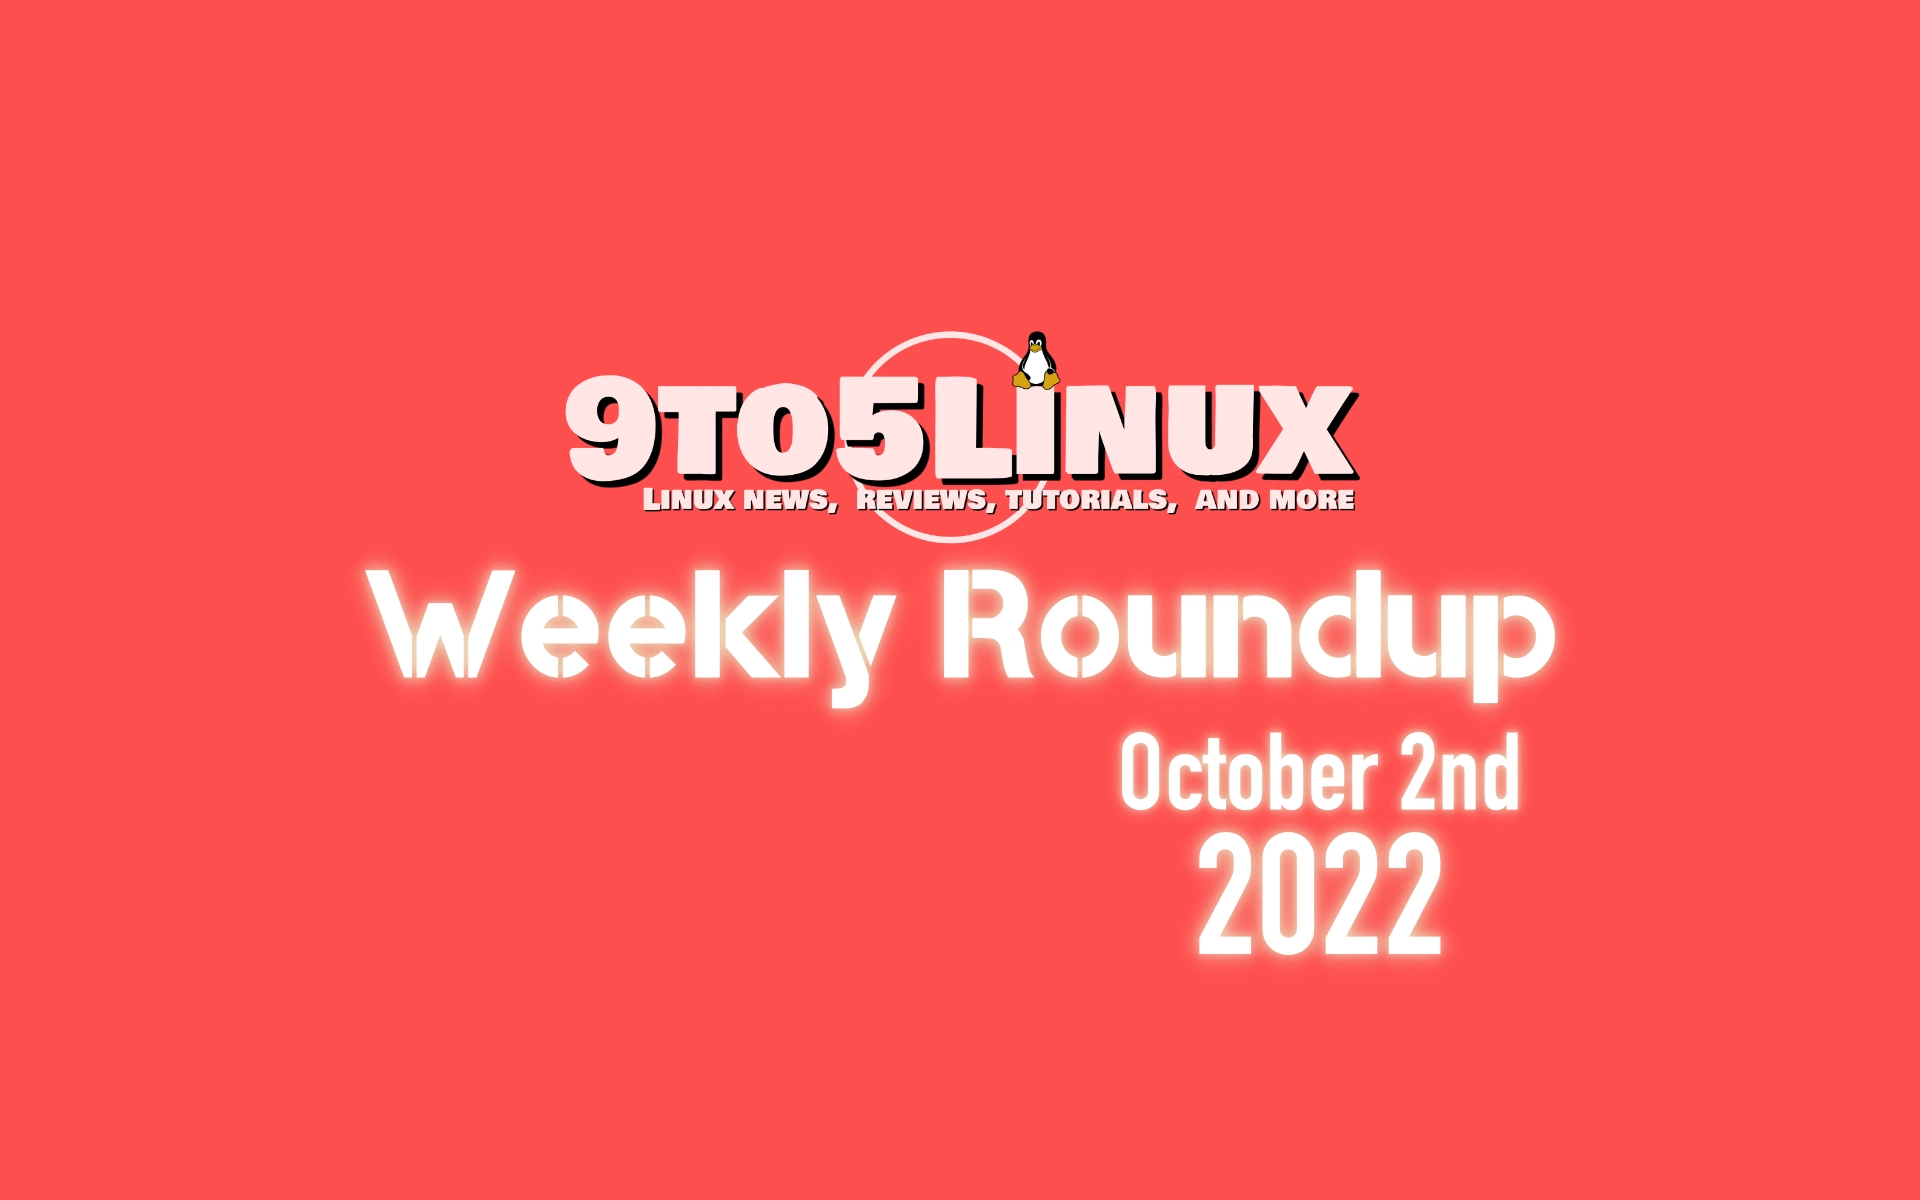 9to5Linux Weekly Roundup: October 2nd, 2022